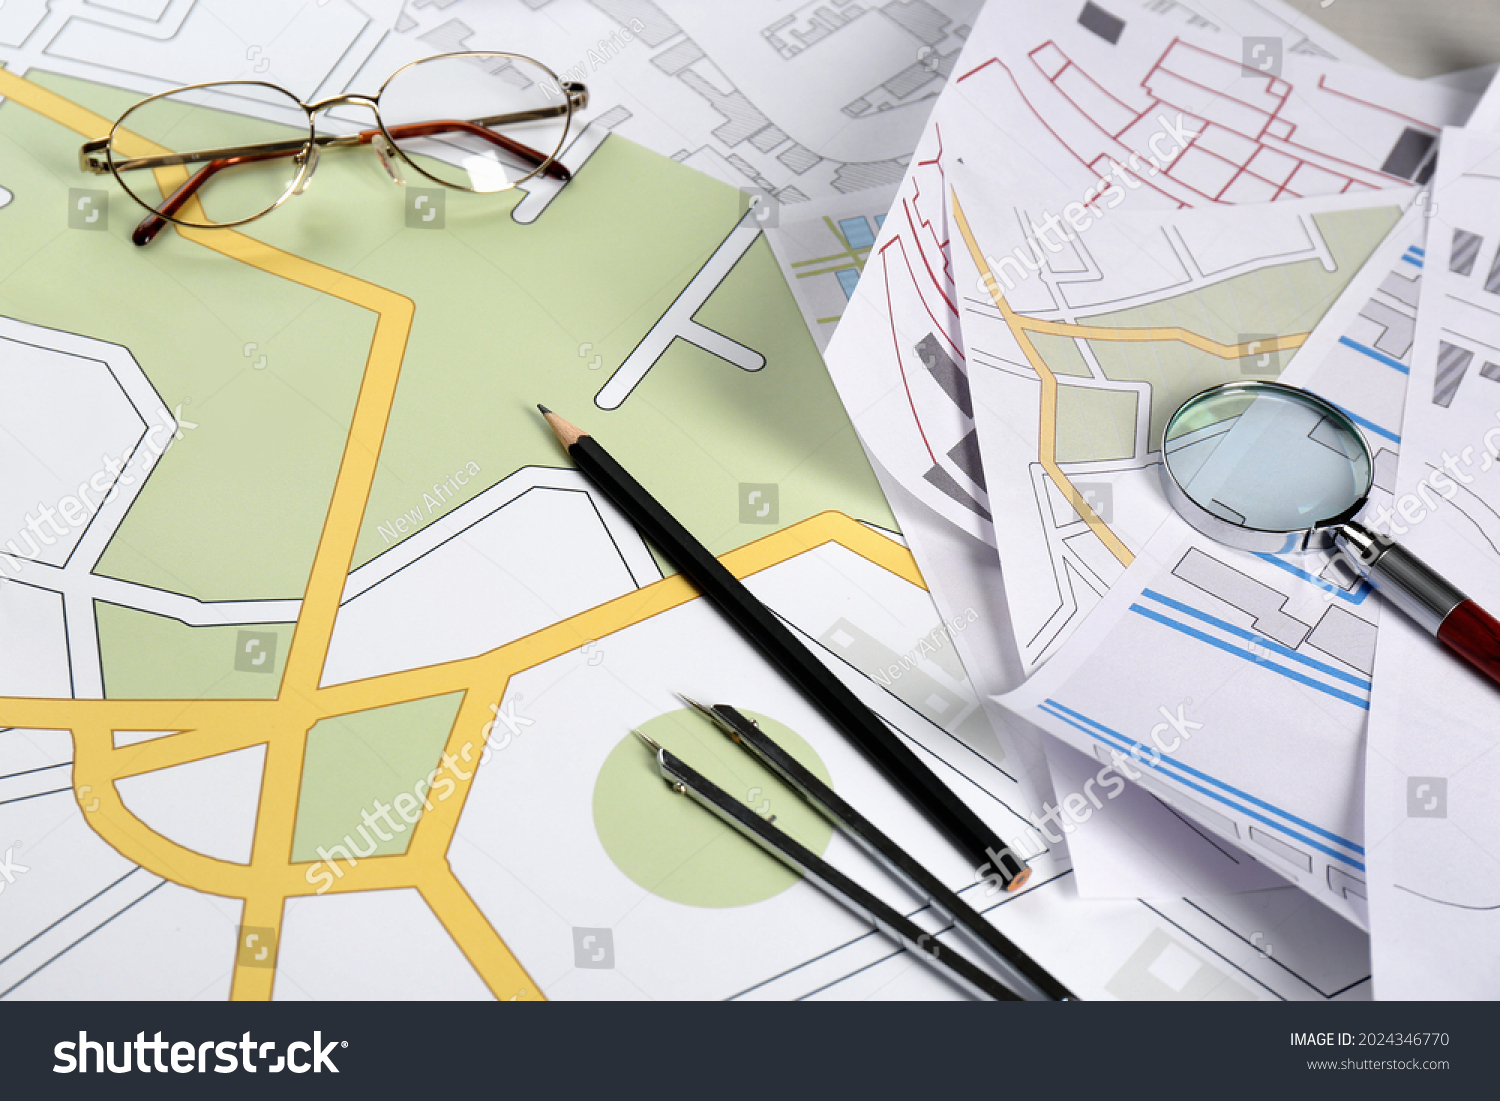 Office stationery and eyeglasses on cadastral maps of territory with buildings #2024346770